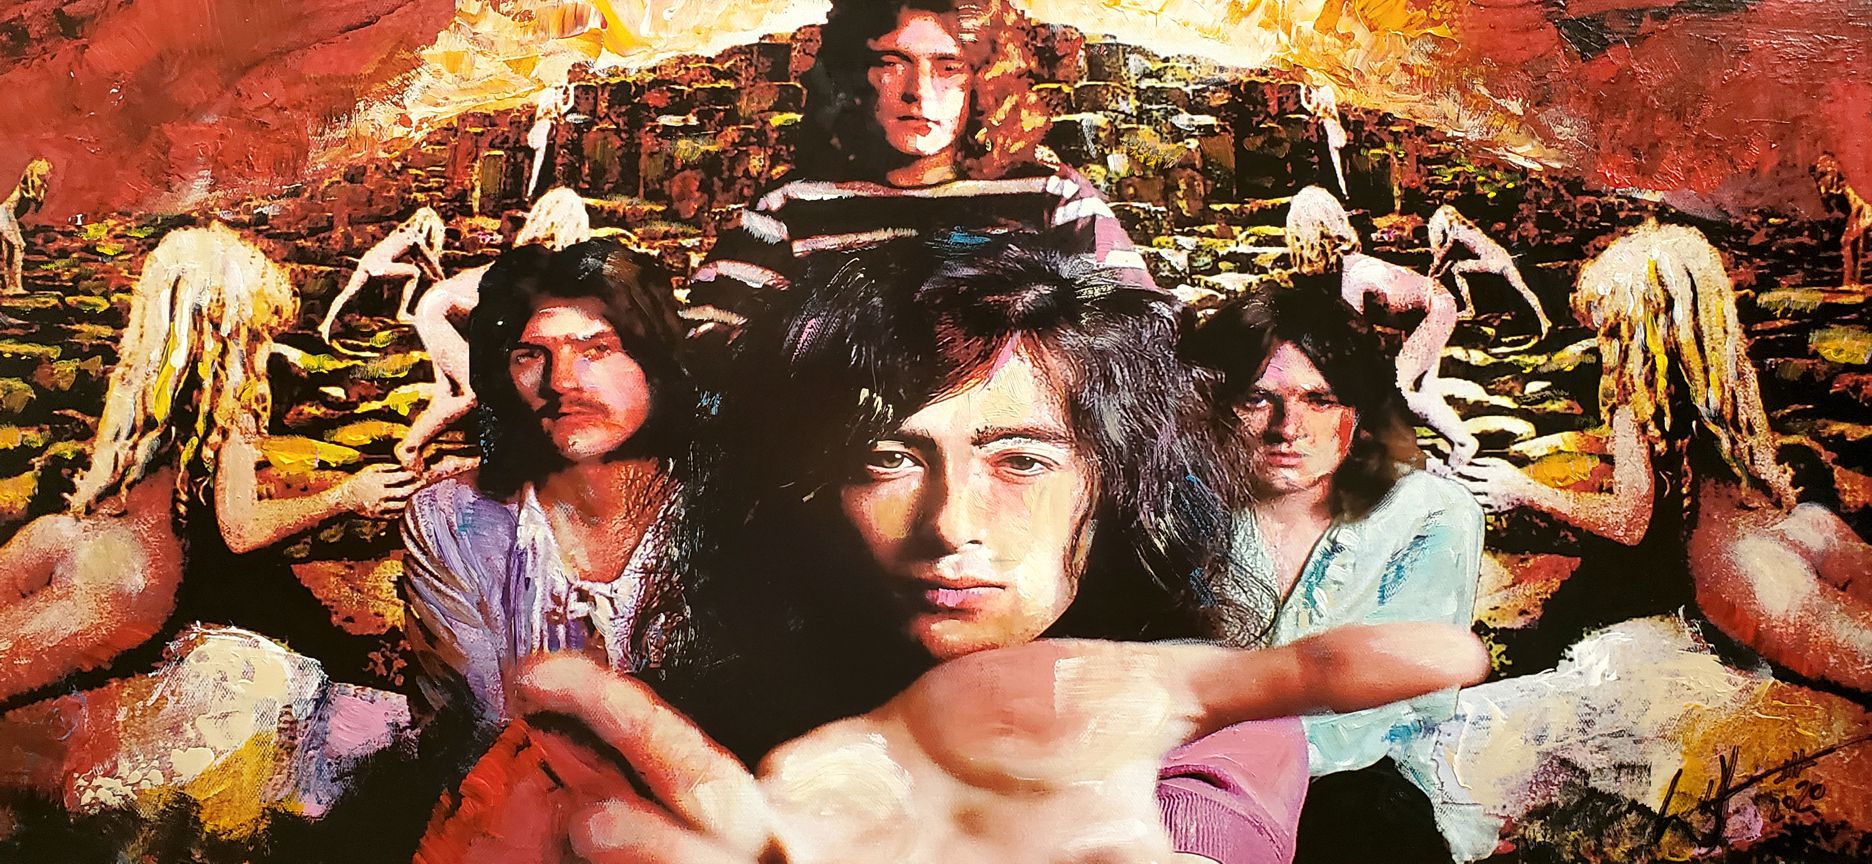 'Houses of the Holy' Led Zeppelin painting by artist, William III